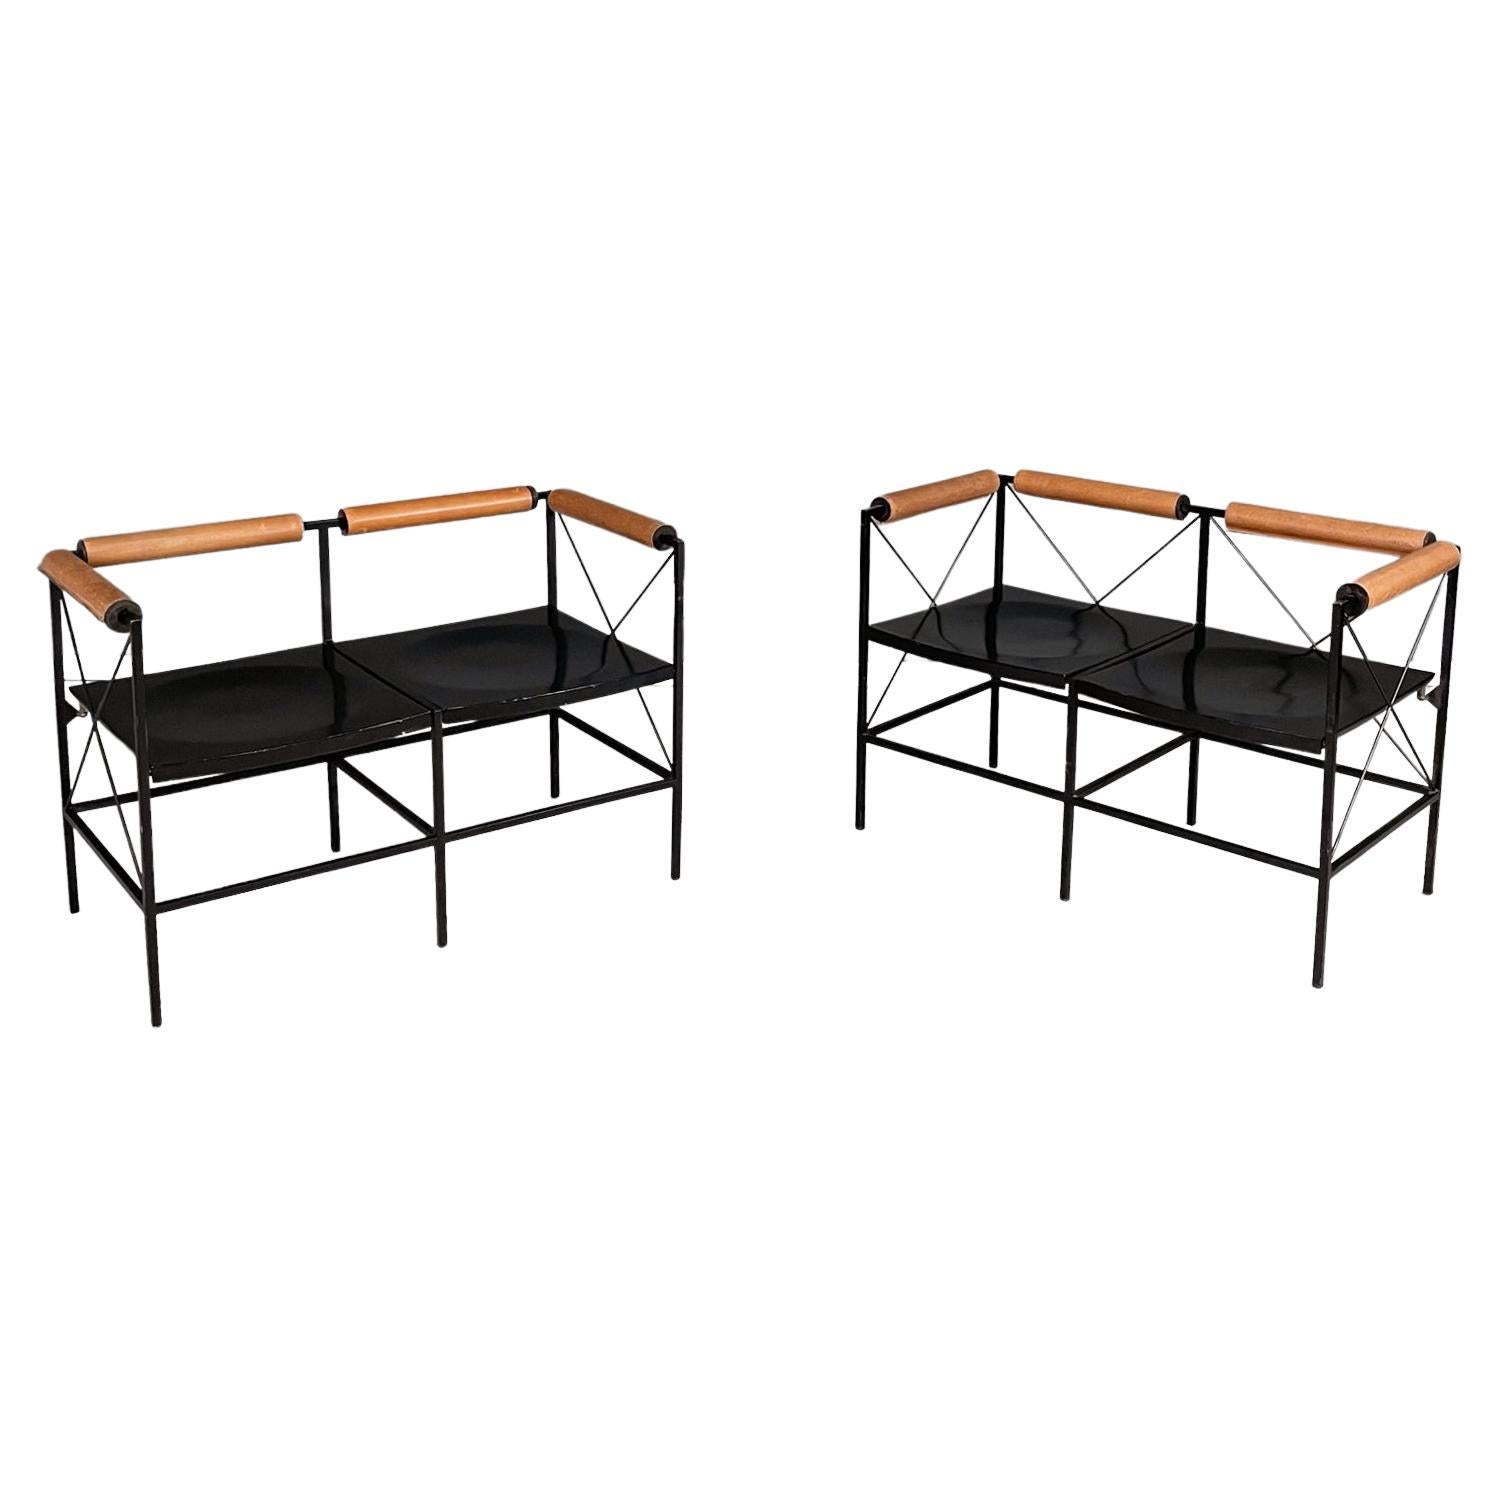 Italian modern black metal wood brown leather 2seater benches Felicerossi, 1980s For Sale